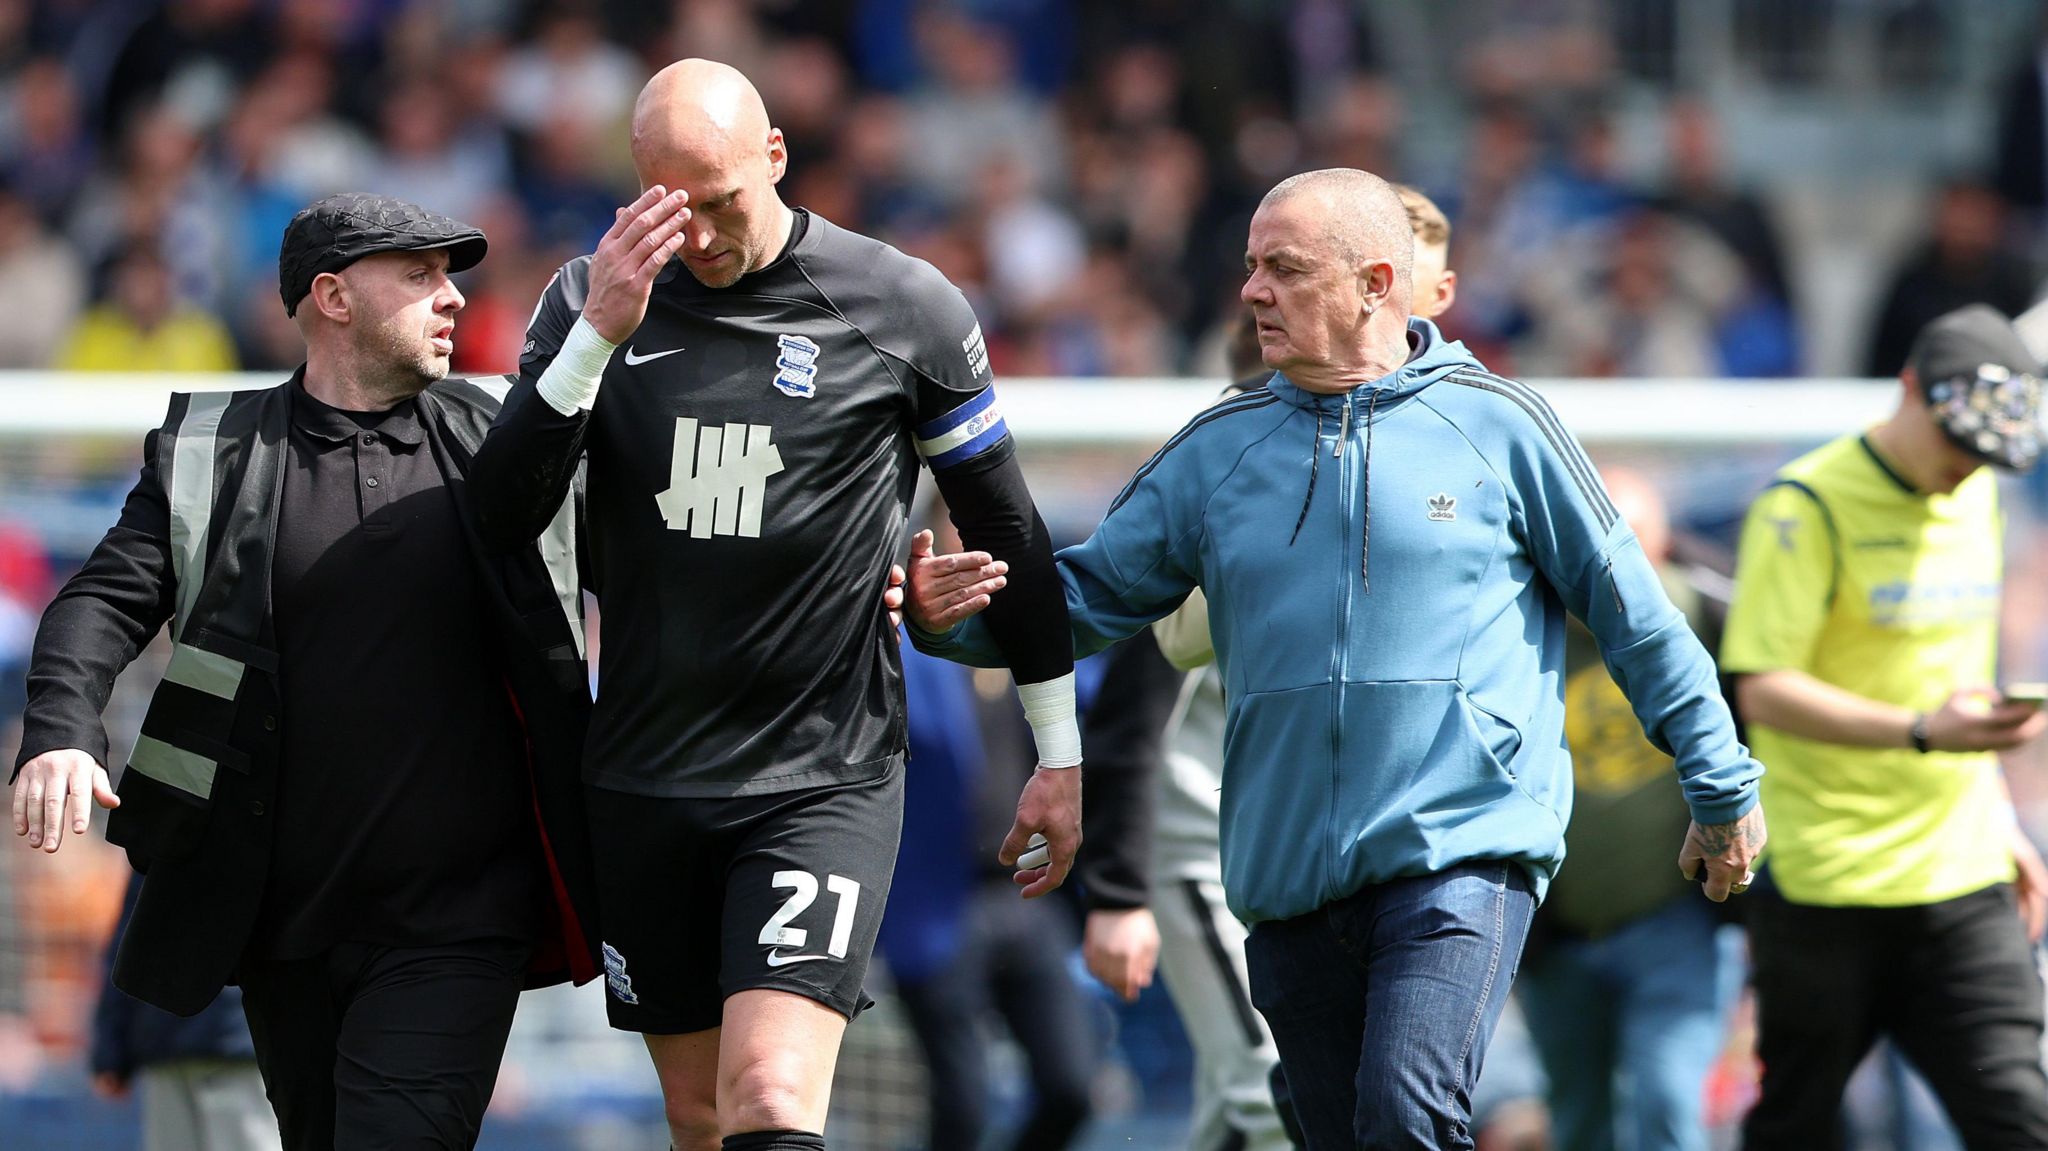 Goalkeeper John Ruddy puts his hand to his head while he is confronted by a fan on his left with a security guard to his right.